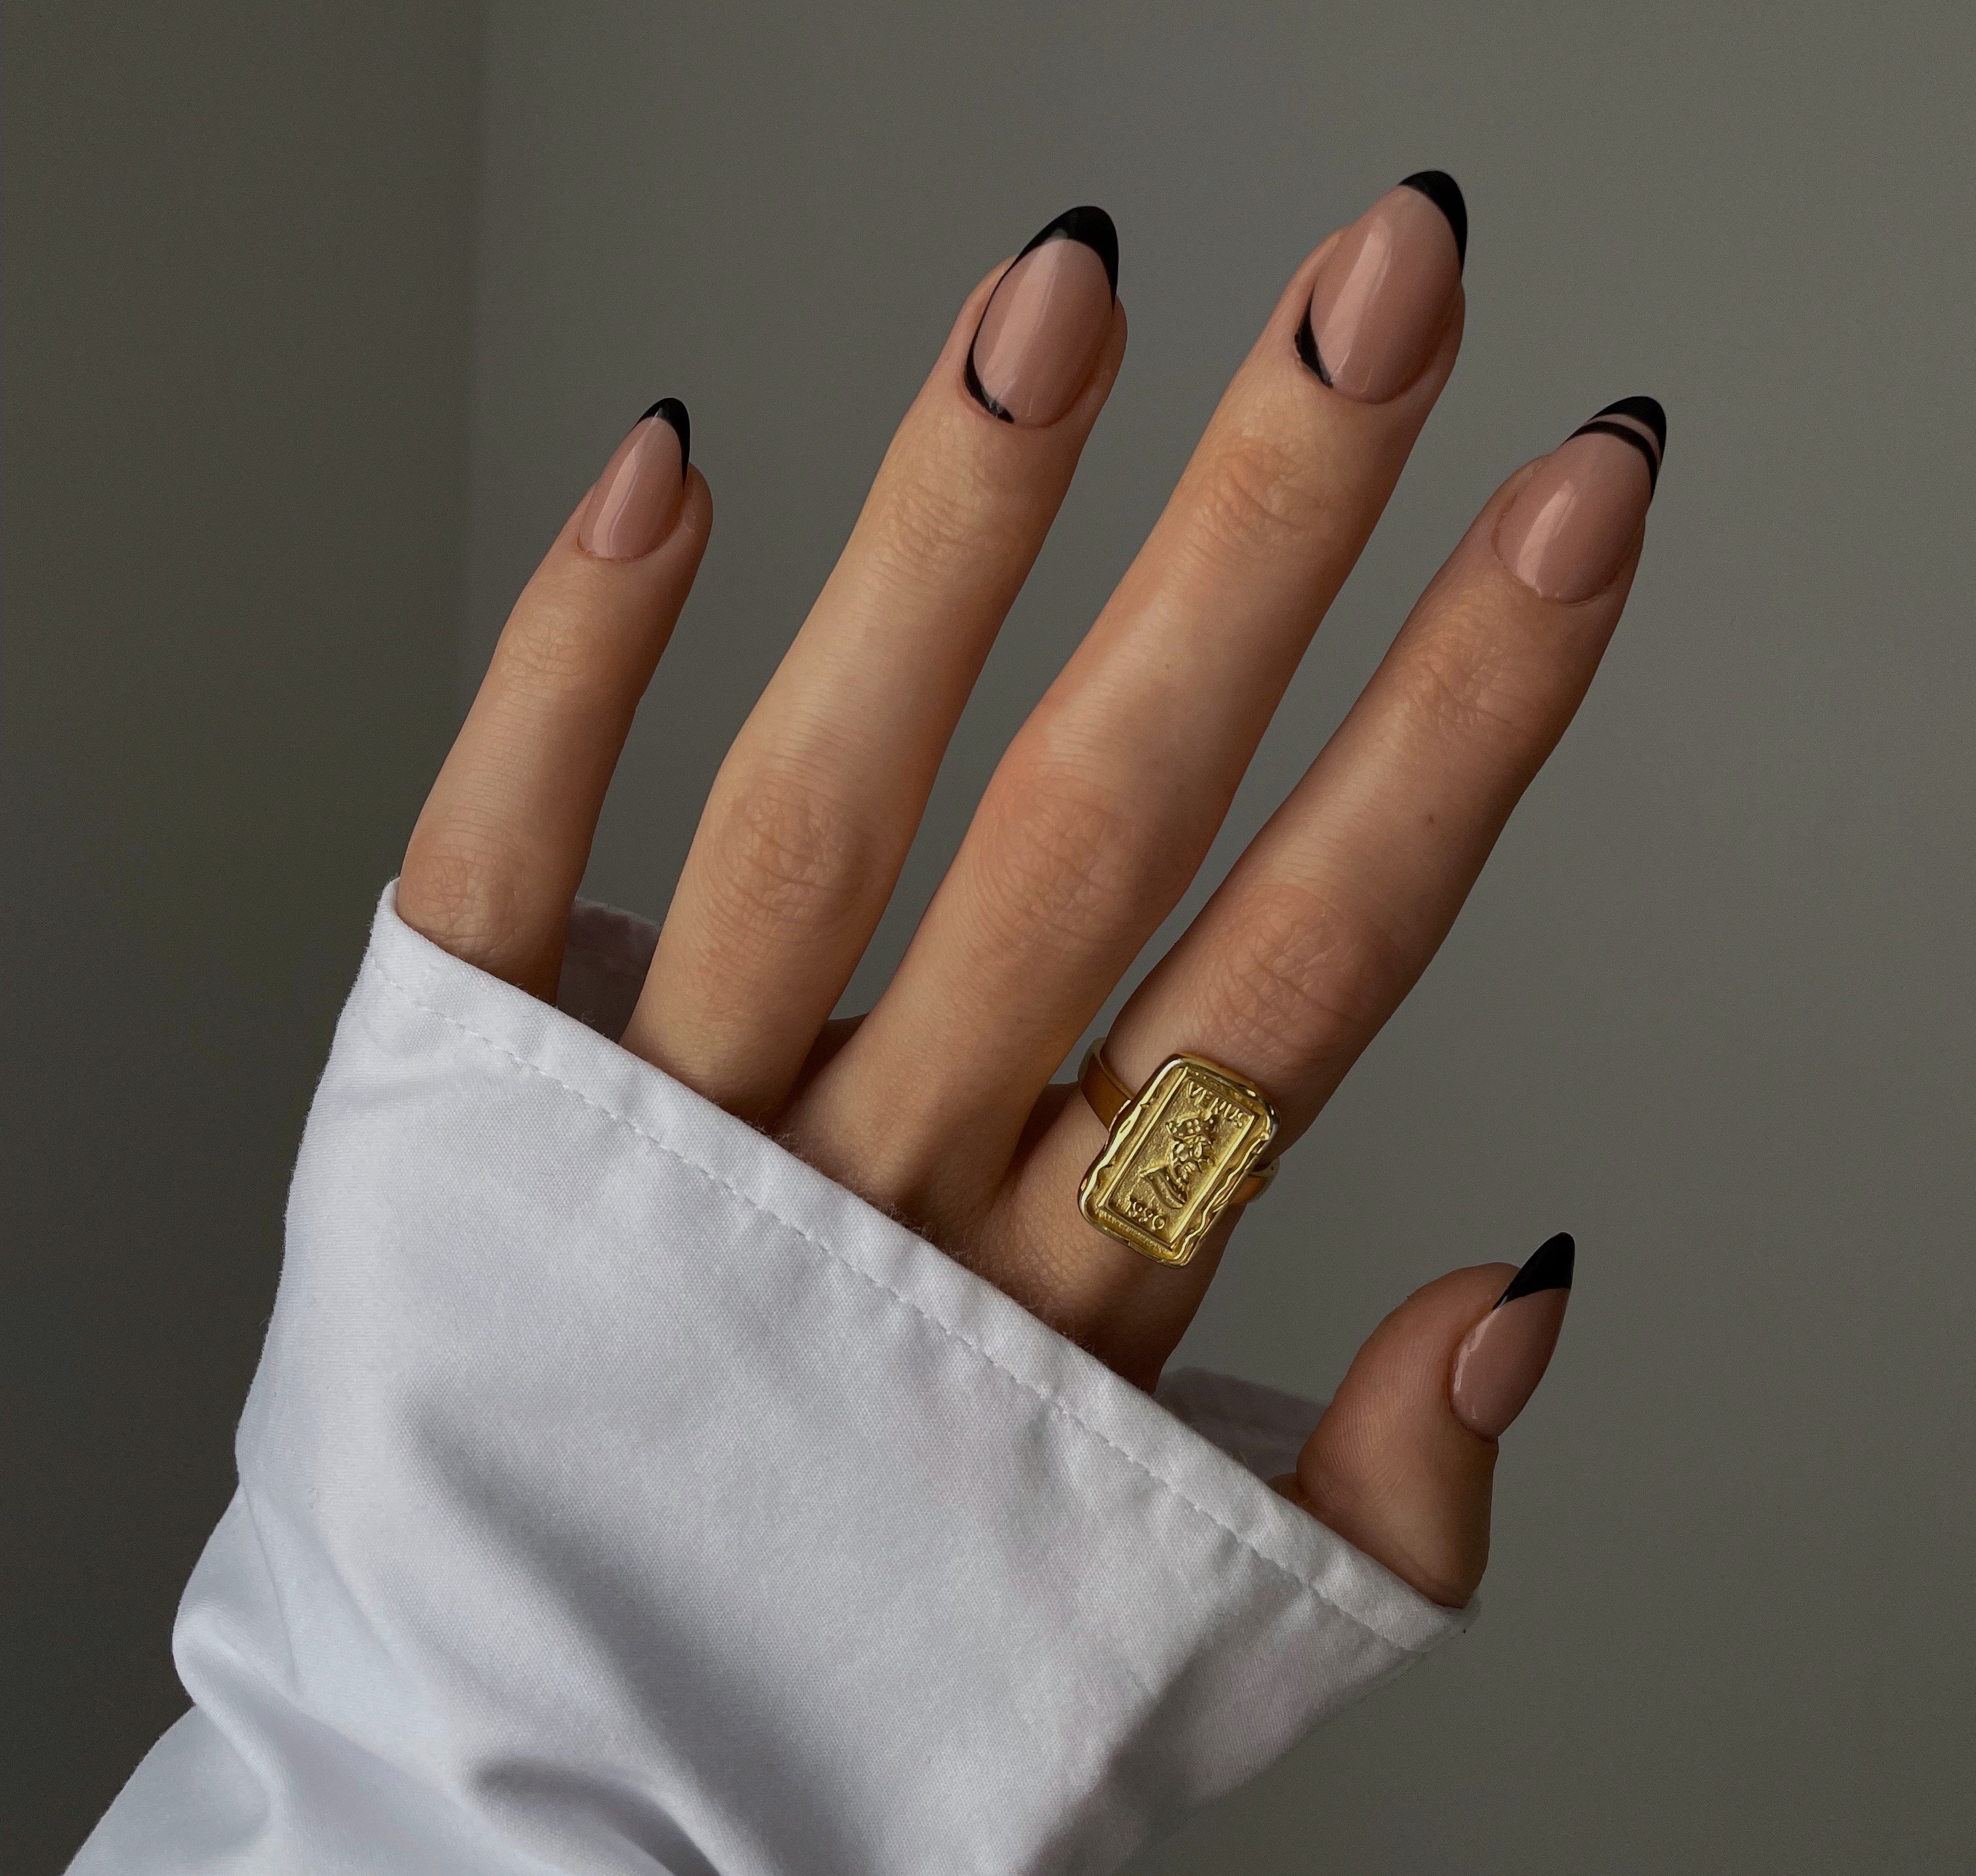 Elegant hand with Black Tip nails. | Source: Getty Images